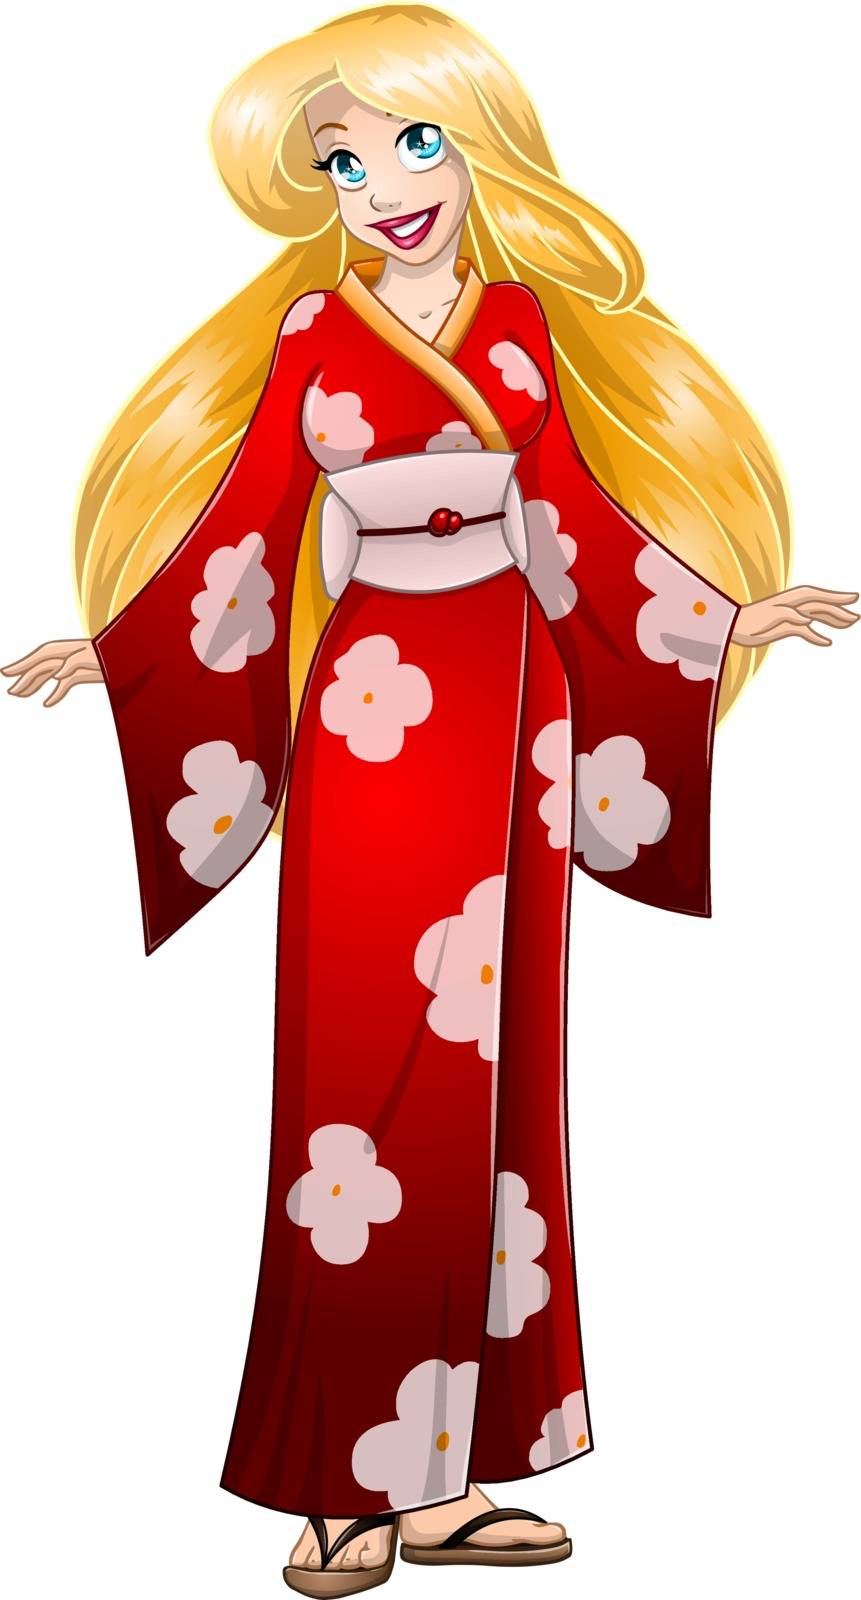 Blond Woman In Red Kimono by LironPeer